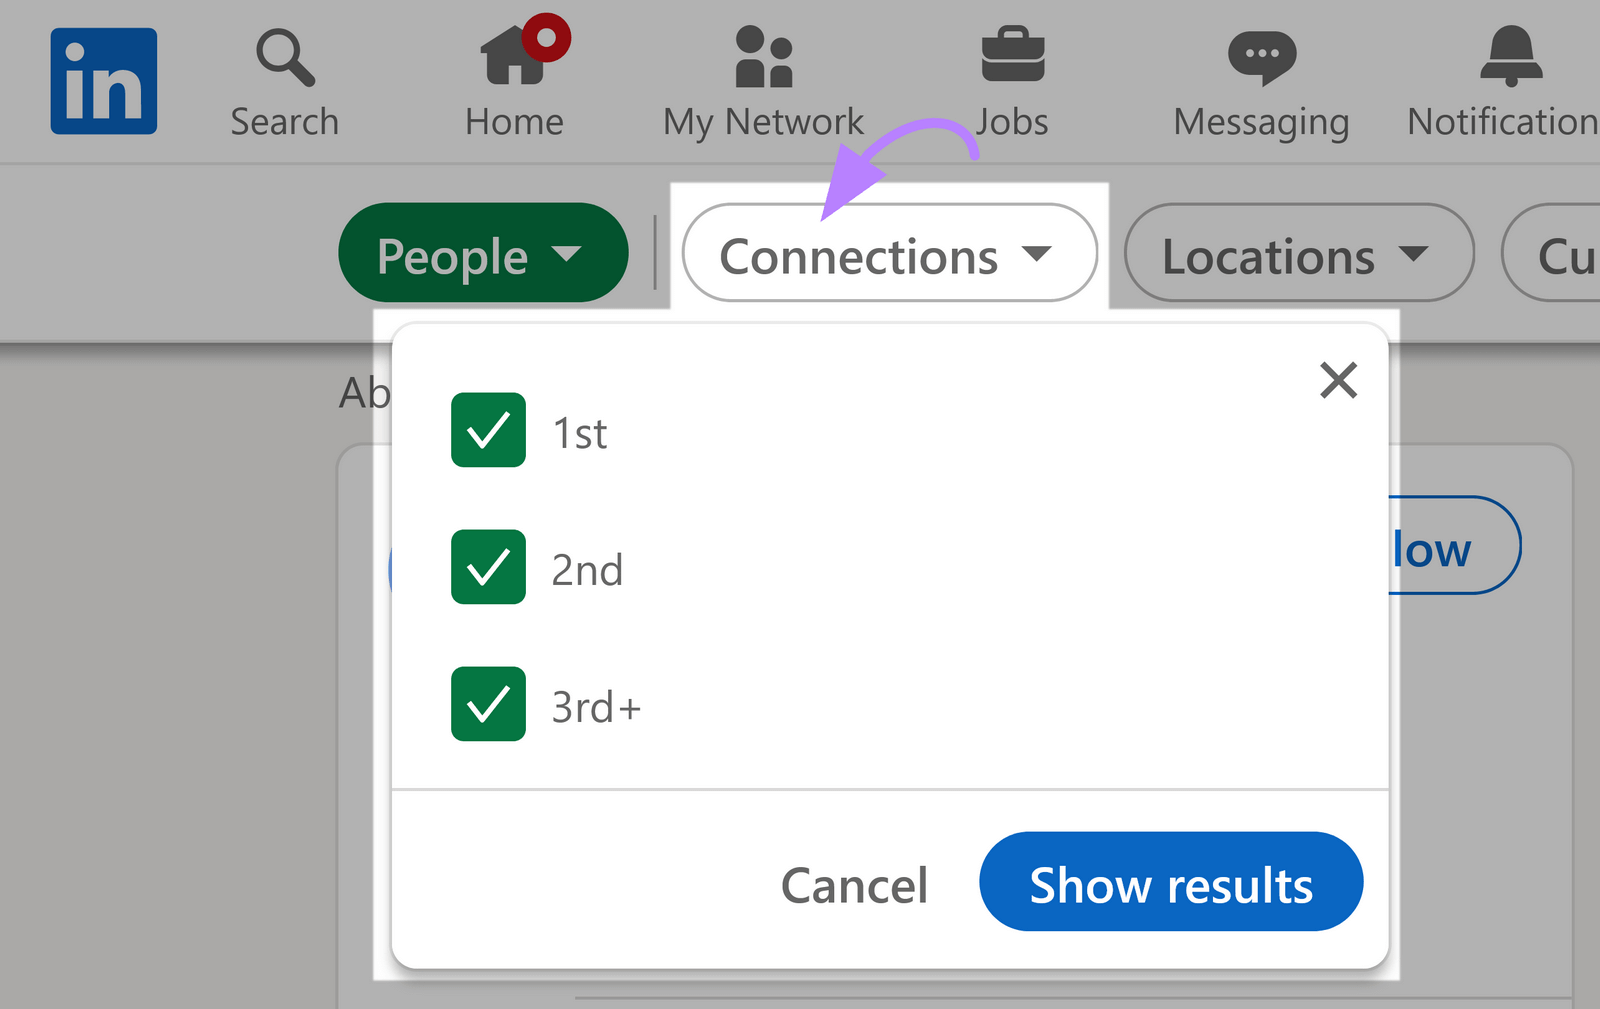 LinkedIn "Connections" filter with drop-down menu containing "1st", "2nd" and "3rd+" checkboxes